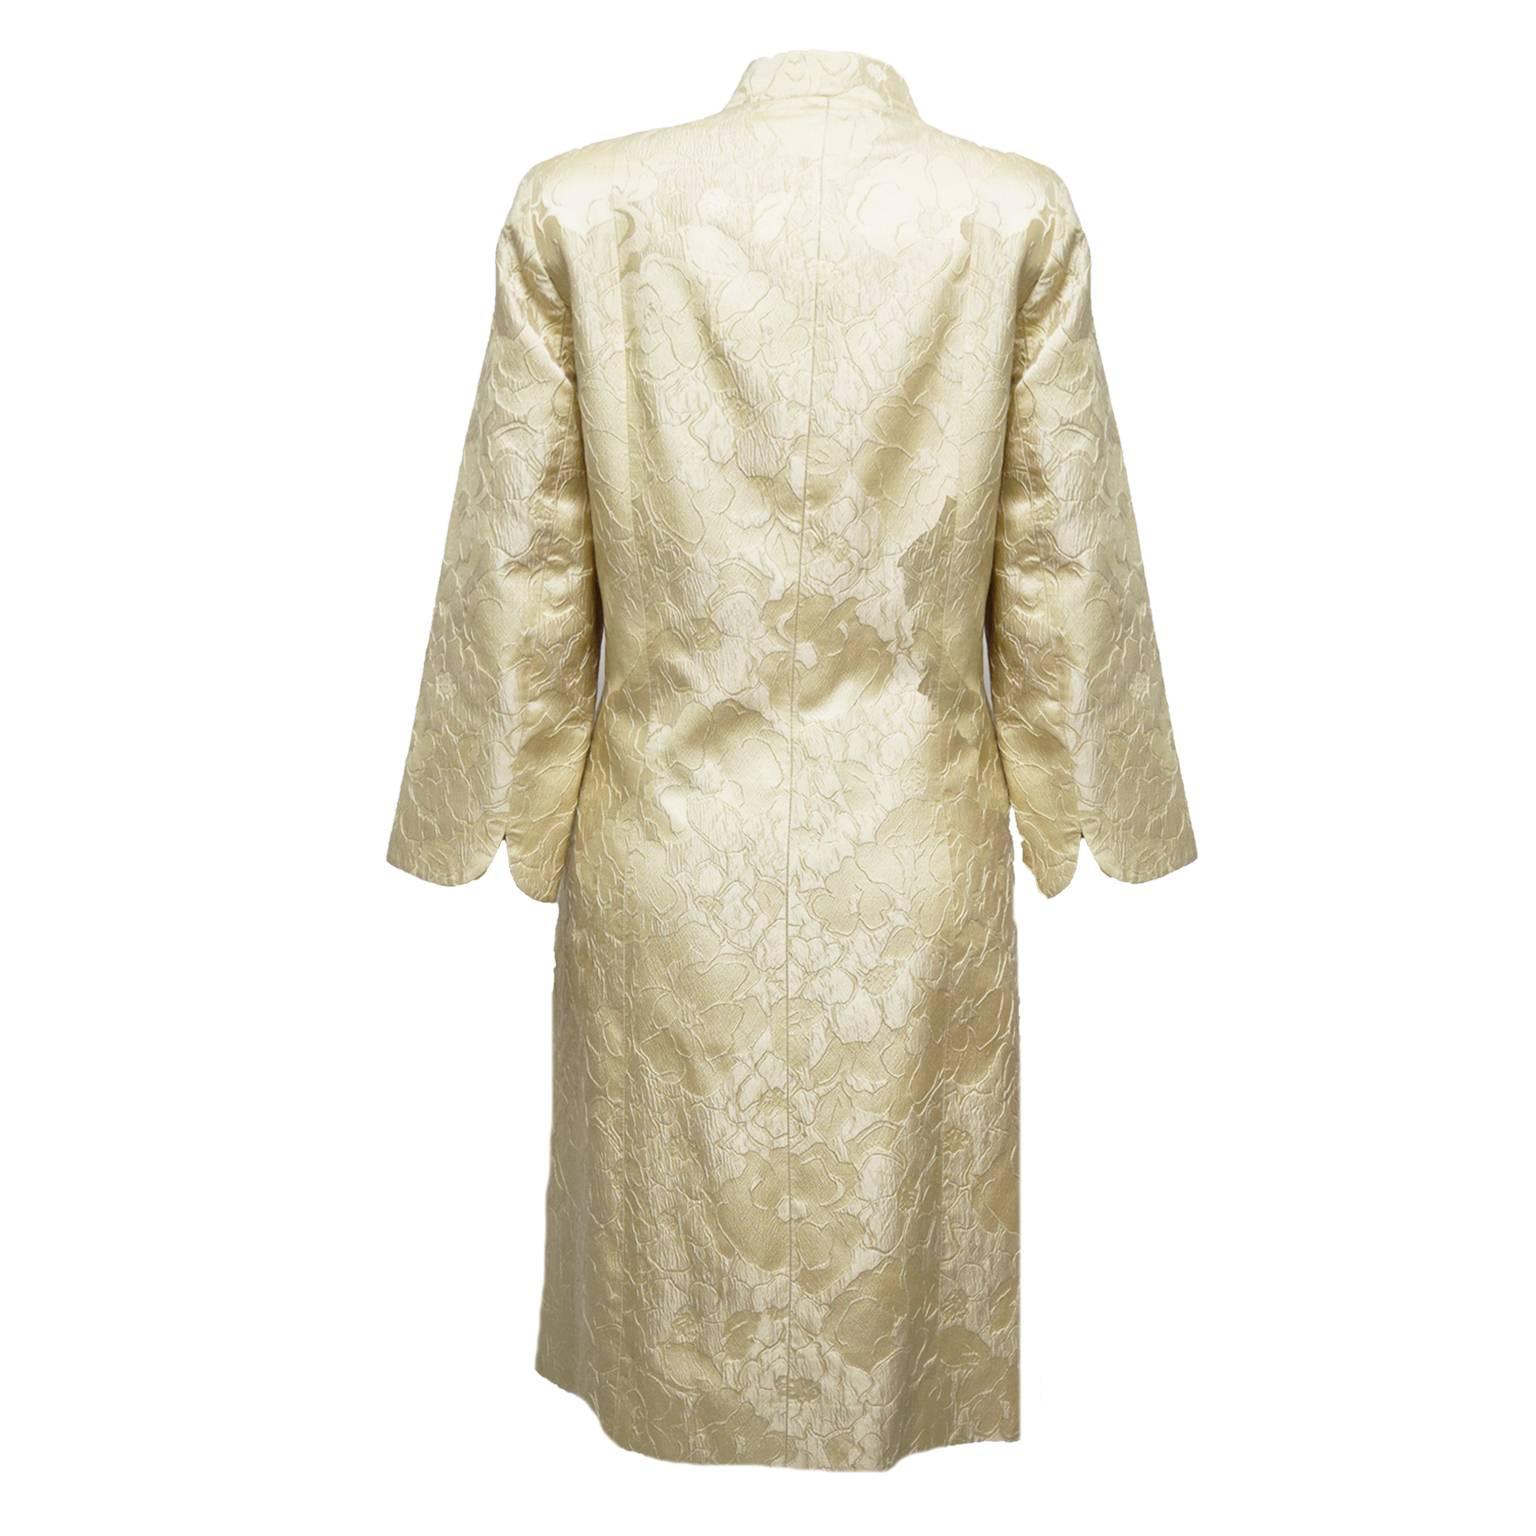 This exquisite piece is the epitome of elegance. Made with brocade and lined with light gold silk, wearing this piece is a luxury. Mandarin Collar, side slits, and 3 quarter length sleeves. Darts included to add slimming features and to compliment